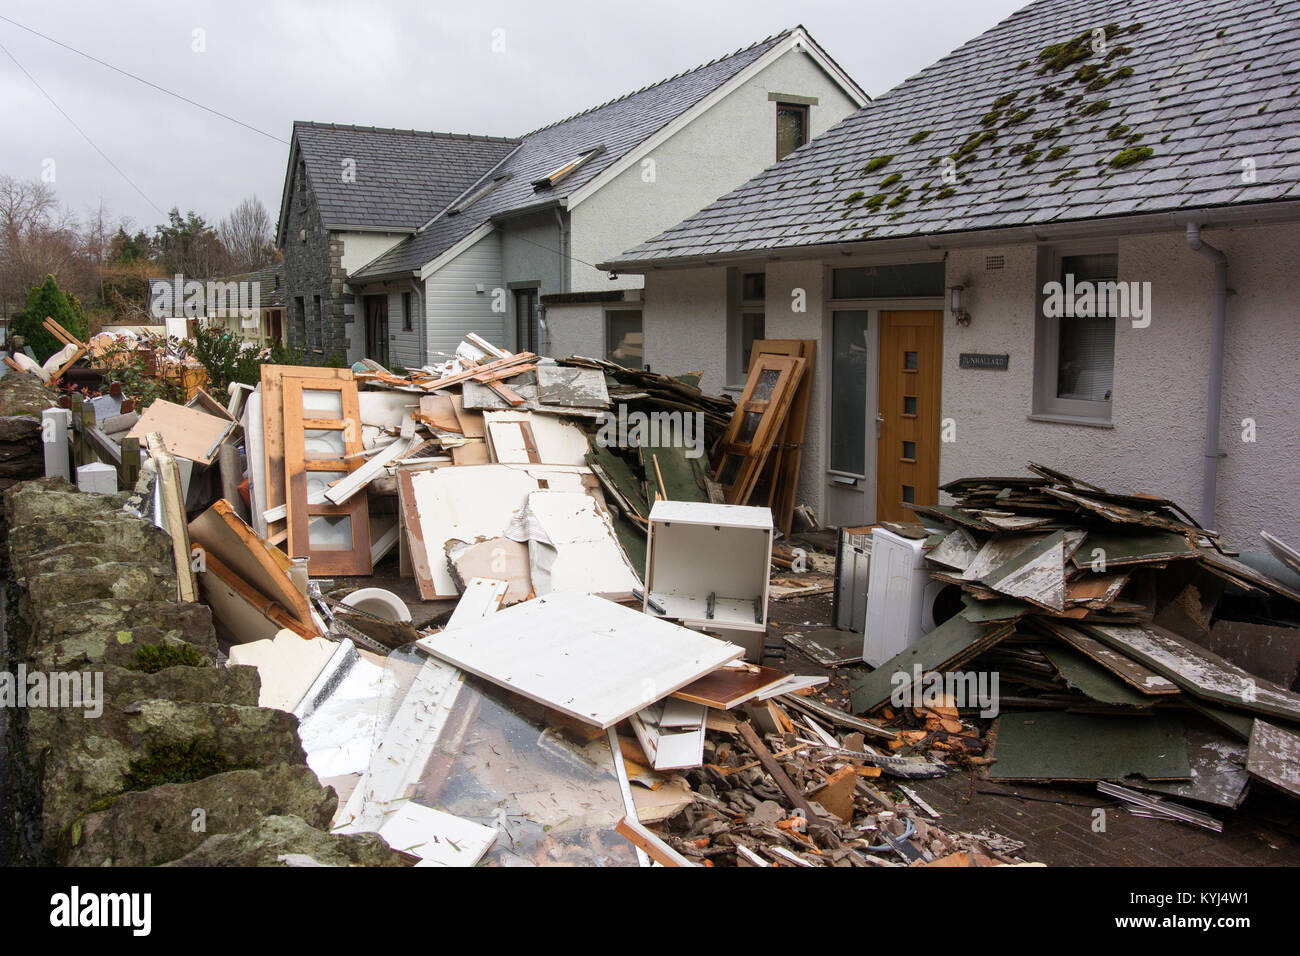 Flooded homes in Pooley Bridge, Cumbria, start the clean up operation. UK Stock Photo